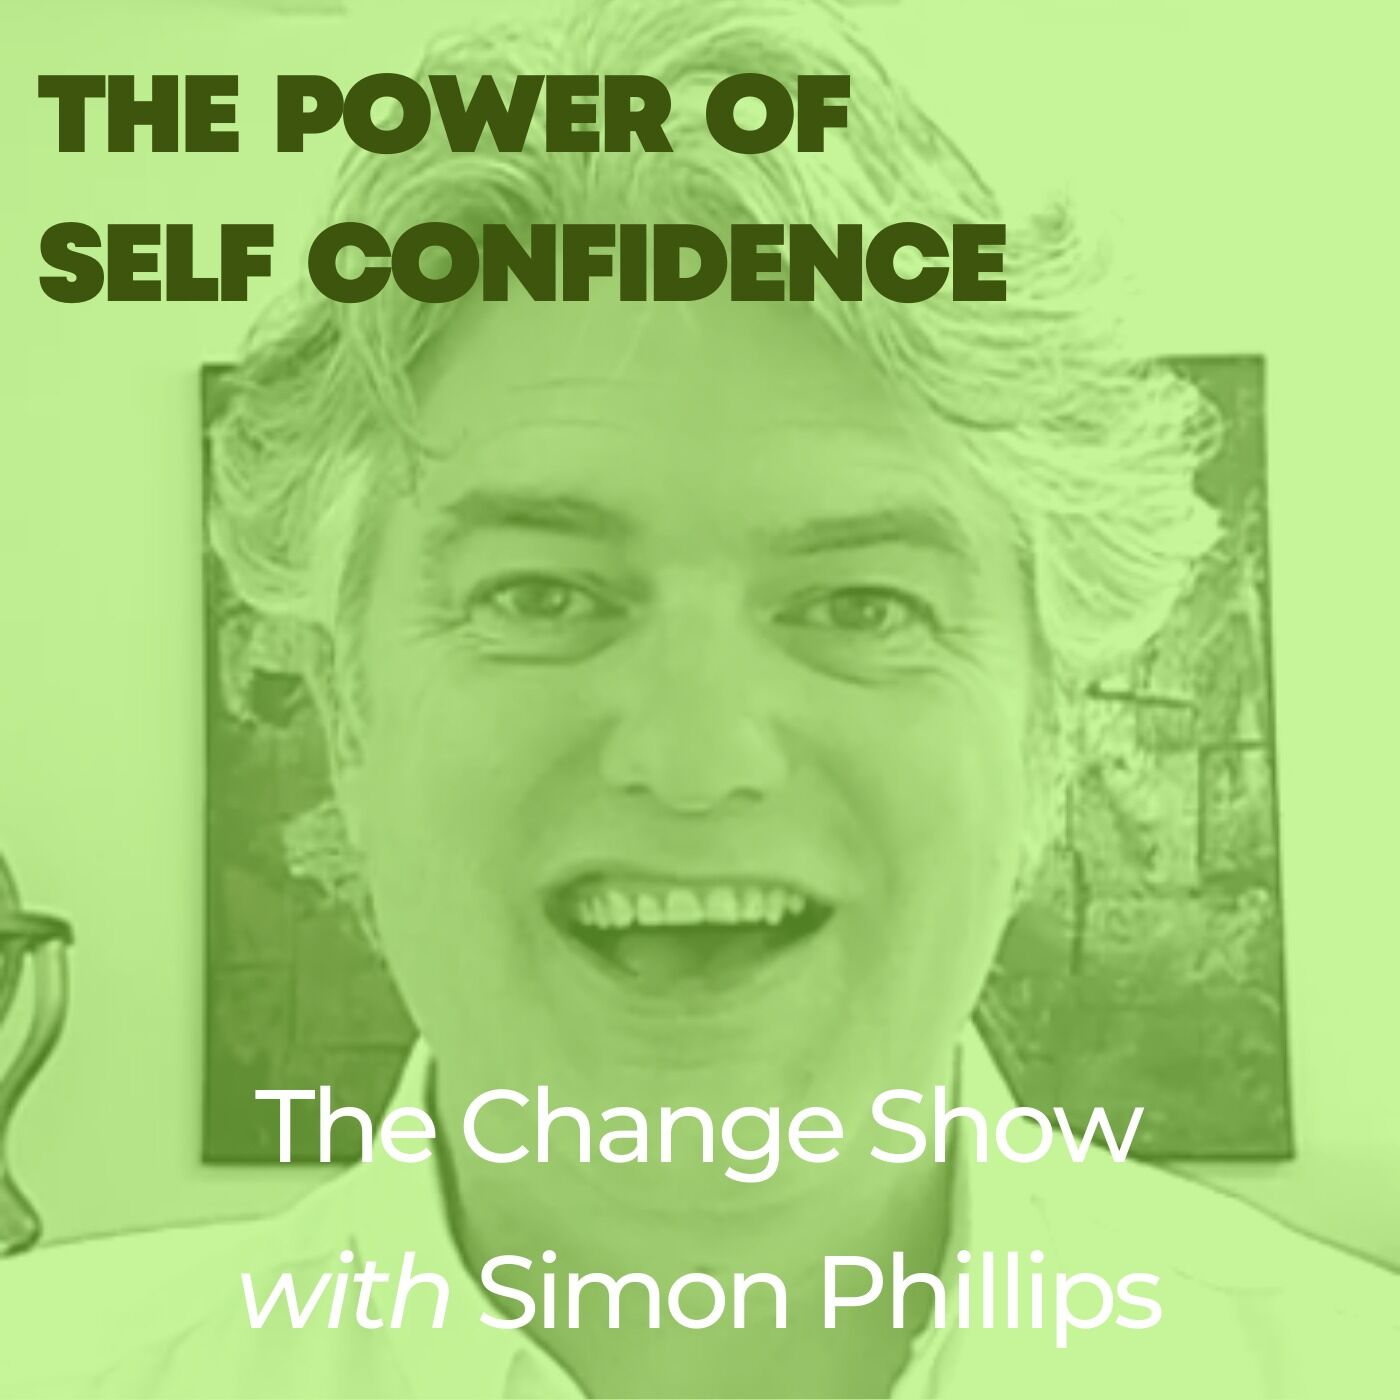 The Power Of Self Confidence